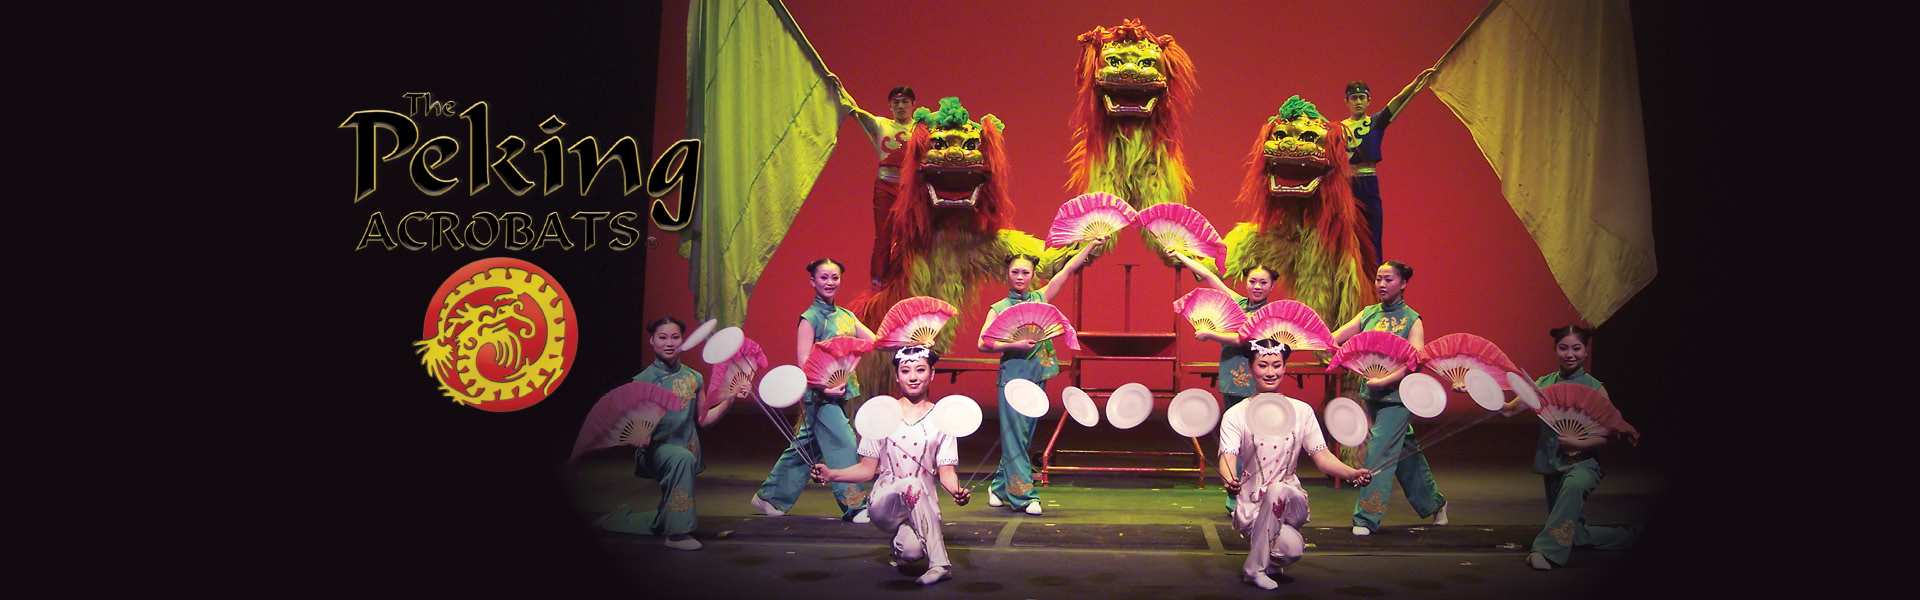 Picture of performance group The Peking Acrobats